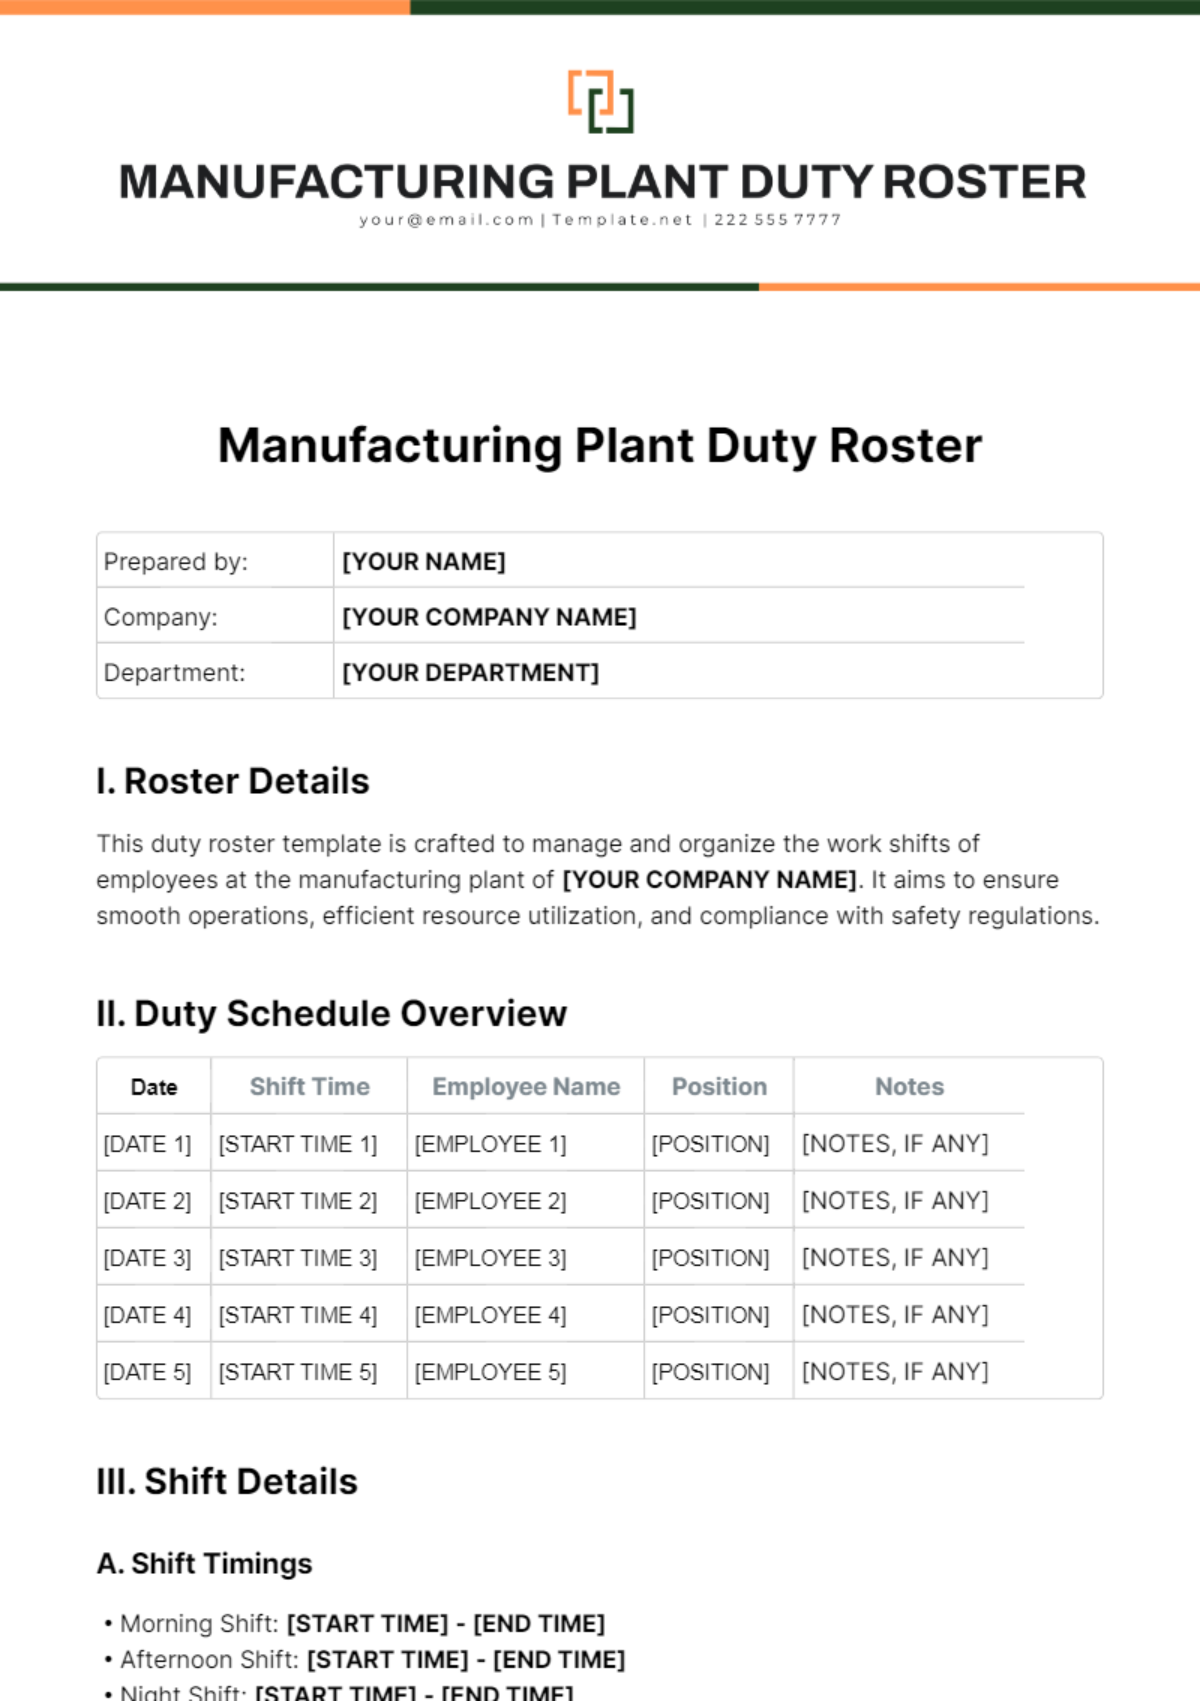 Manufacturing Plant Duty Roster Template